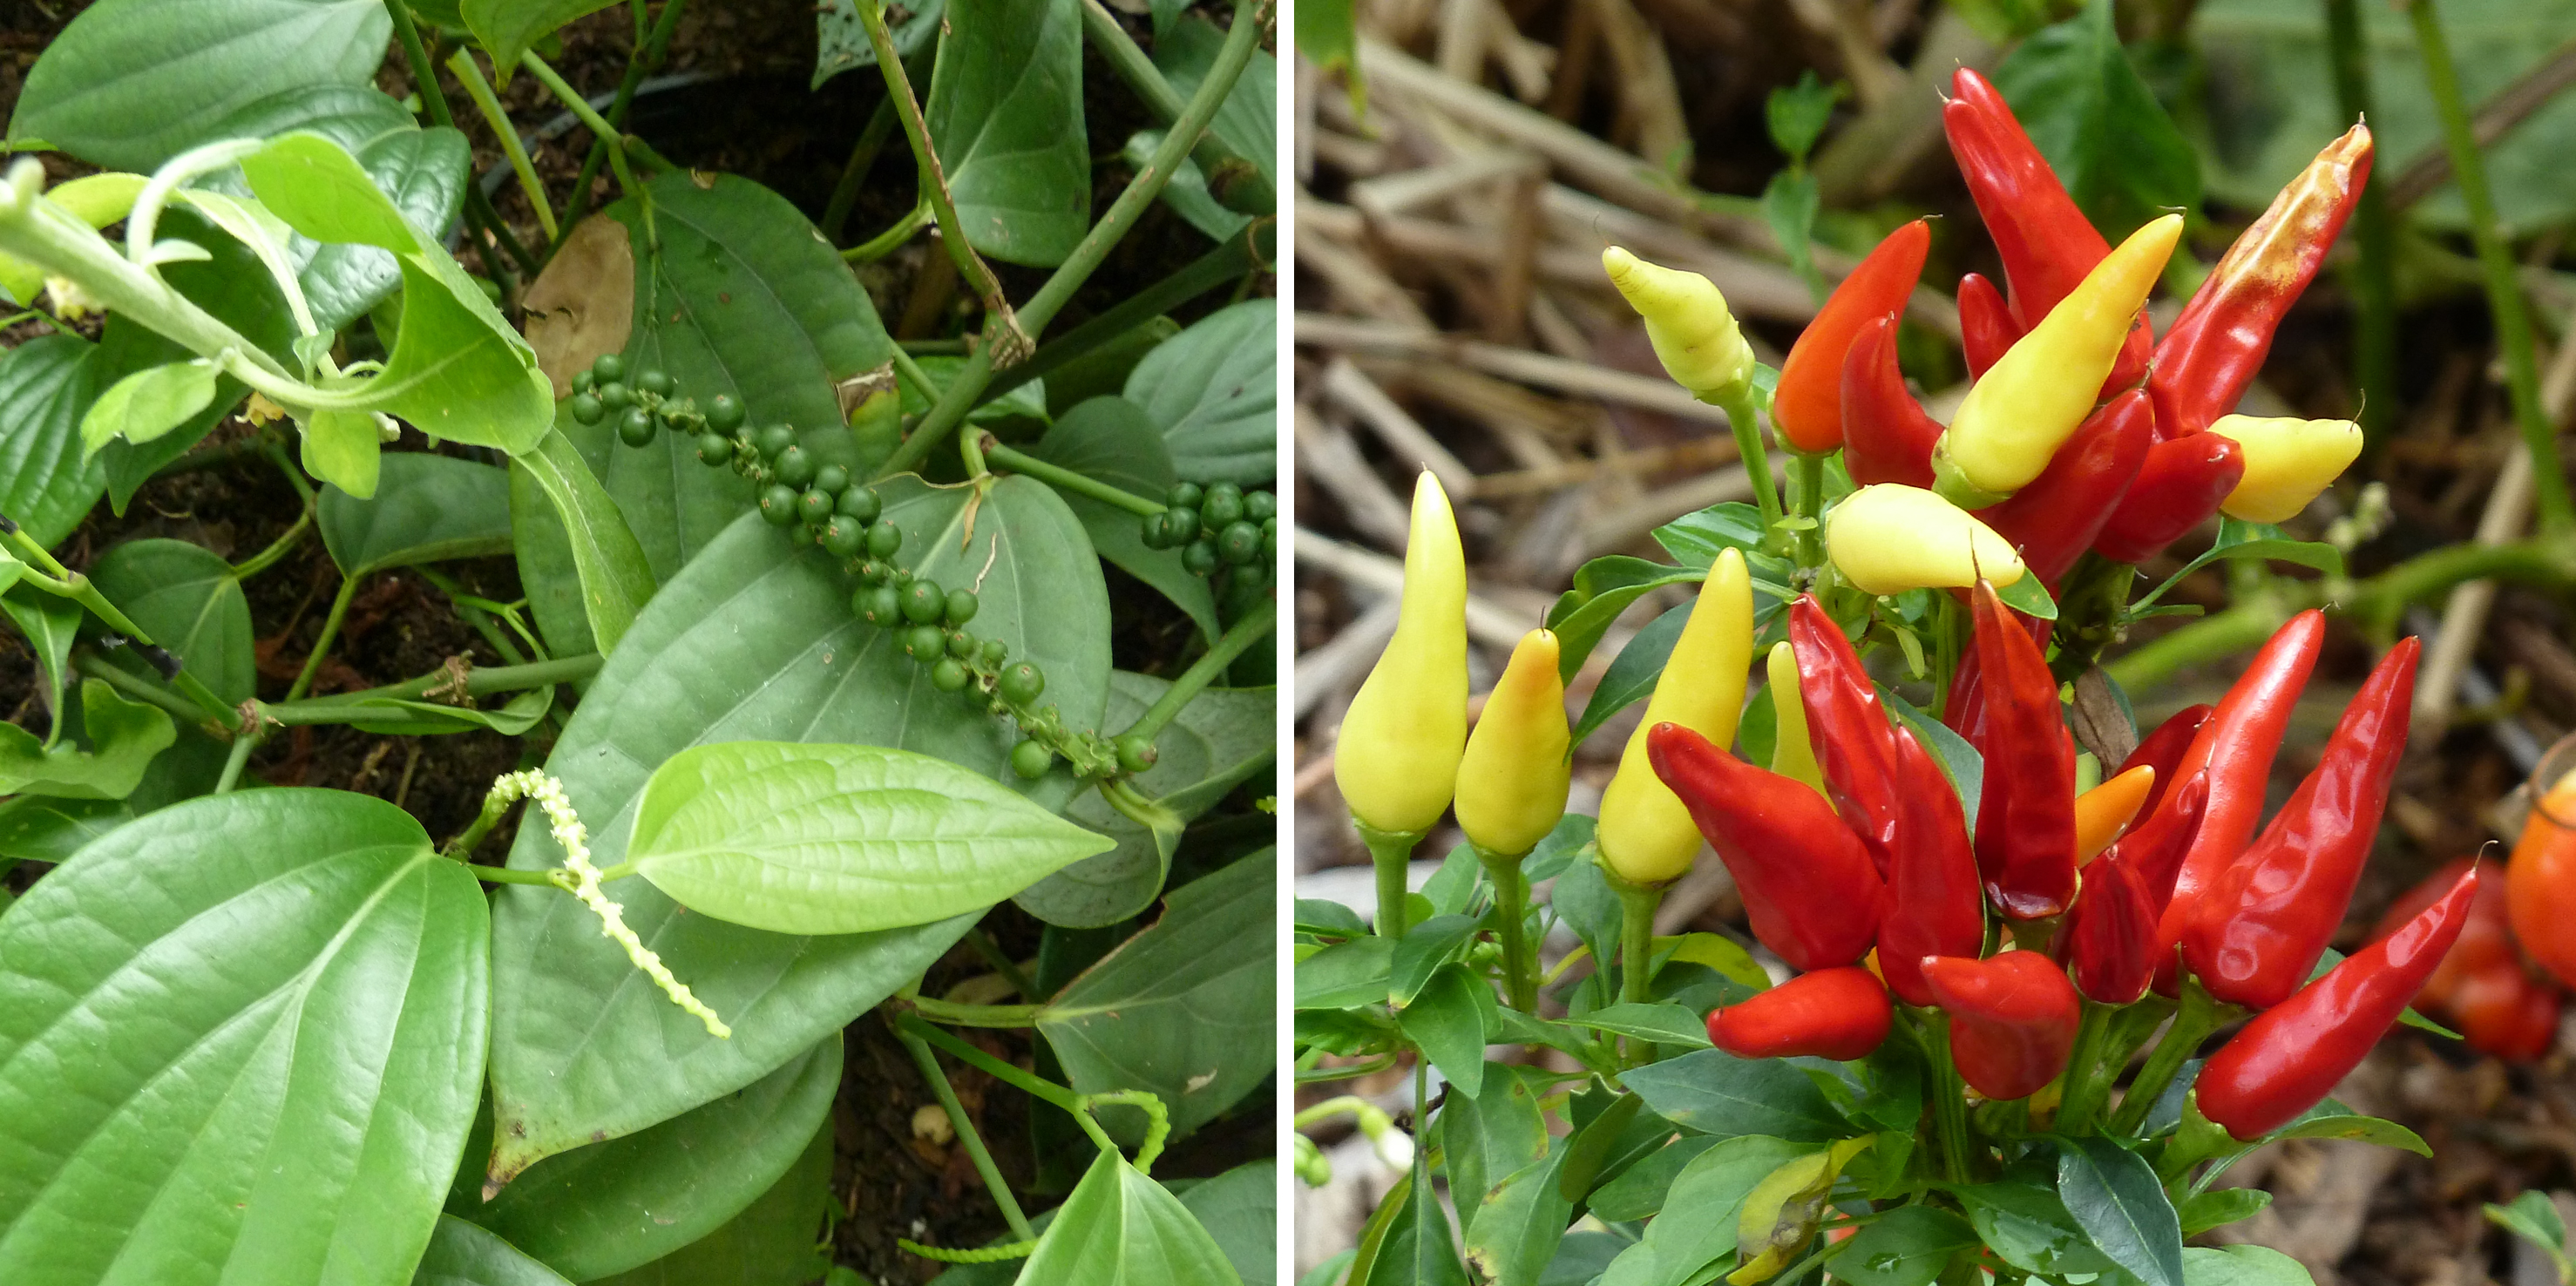 Photographs of unrelated pepper plants.